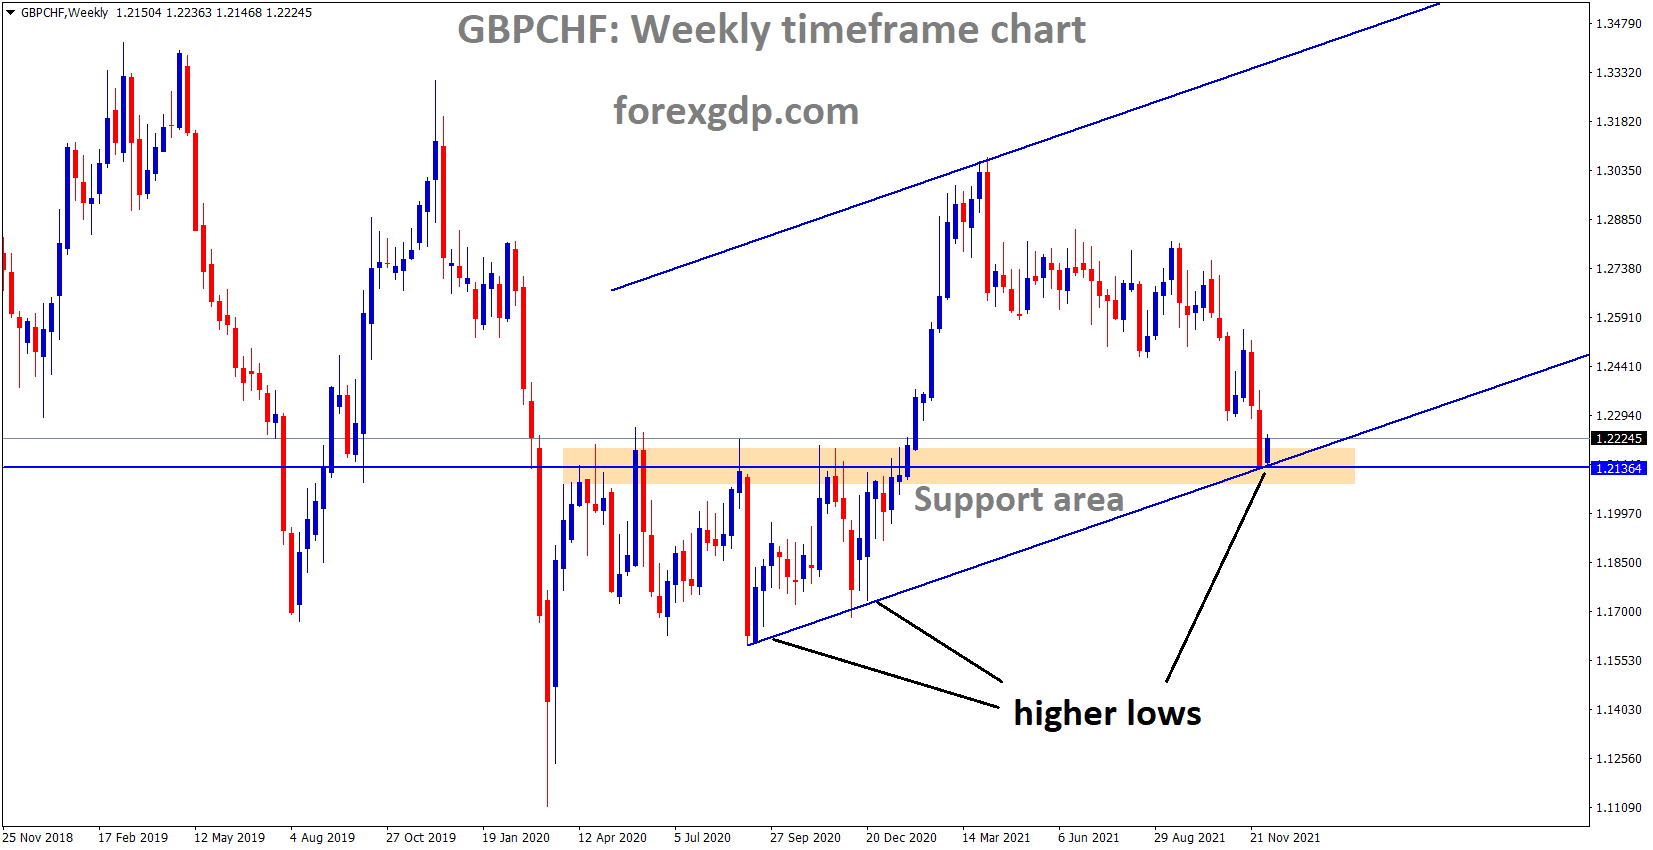 GBPCHF is moving in an Ascending channel and the market has reached the Horizontal support area and higher low area of the channel